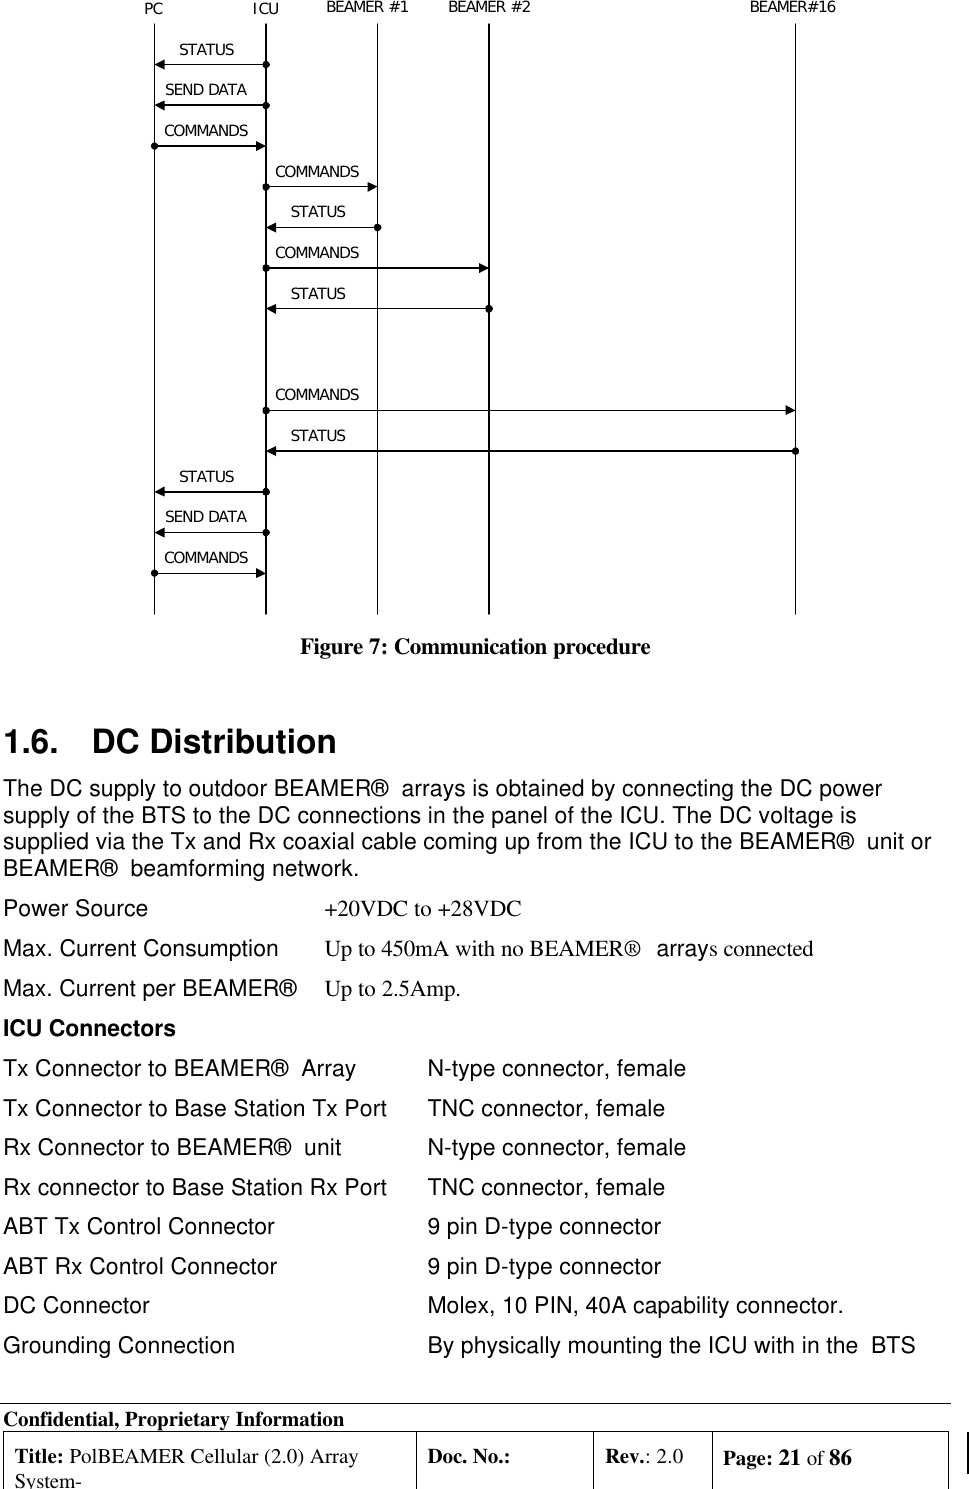 Confidential, Proprietary InformationTitle: PolBEAMER Cellular (2.0) ArraySystem-Doc. No.: Rev.: 2.0 Page: 21 of 86PC ICU BEAMER #1SEND DATACOMMANDSCOMMANDSSTATUSSTATUSSEND DATABEAMER #2 BEAMER#16COMMANDSSTATUSCOMMANDSSTATUSCOMMANDSSTATUSFigure 7: Communication procedure1.6. DC DistributionThe DC supply to outdoor BEAMER®  arrays is obtained by connecting the DC powersupply of the BTS to the DC connections in the panel of the ICU. The DC voltage issupplied via the Tx and Rx coaxial cable coming up from the ICU to the BEAMER®  unit orBEAMER®  beamforming network.Power Source +20VDC to +28VDCMax. Current Consumption Up to 450mA with no BEAMER®   arrays connectedMax. Current per BEAMER® Up to 2.5Amp.ICU ConnectorsTx Connector to BEAMER®  Array N-type connector, femaleTx Connector to Base Station Tx Port TNC connector, femaleRx Connector to BEAMER®  unit N-type connector, femaleRx connector to Base Station Rx Port TNC connector, femaleABT Tx Control Connector 9 pin D-type connectorABT Rx Control Connector 9 pin D-type connectorDC Connector Molex, 10 PIN, 40A capability connector.Grounding Connection By physically mounting the ICU with in the  BTS